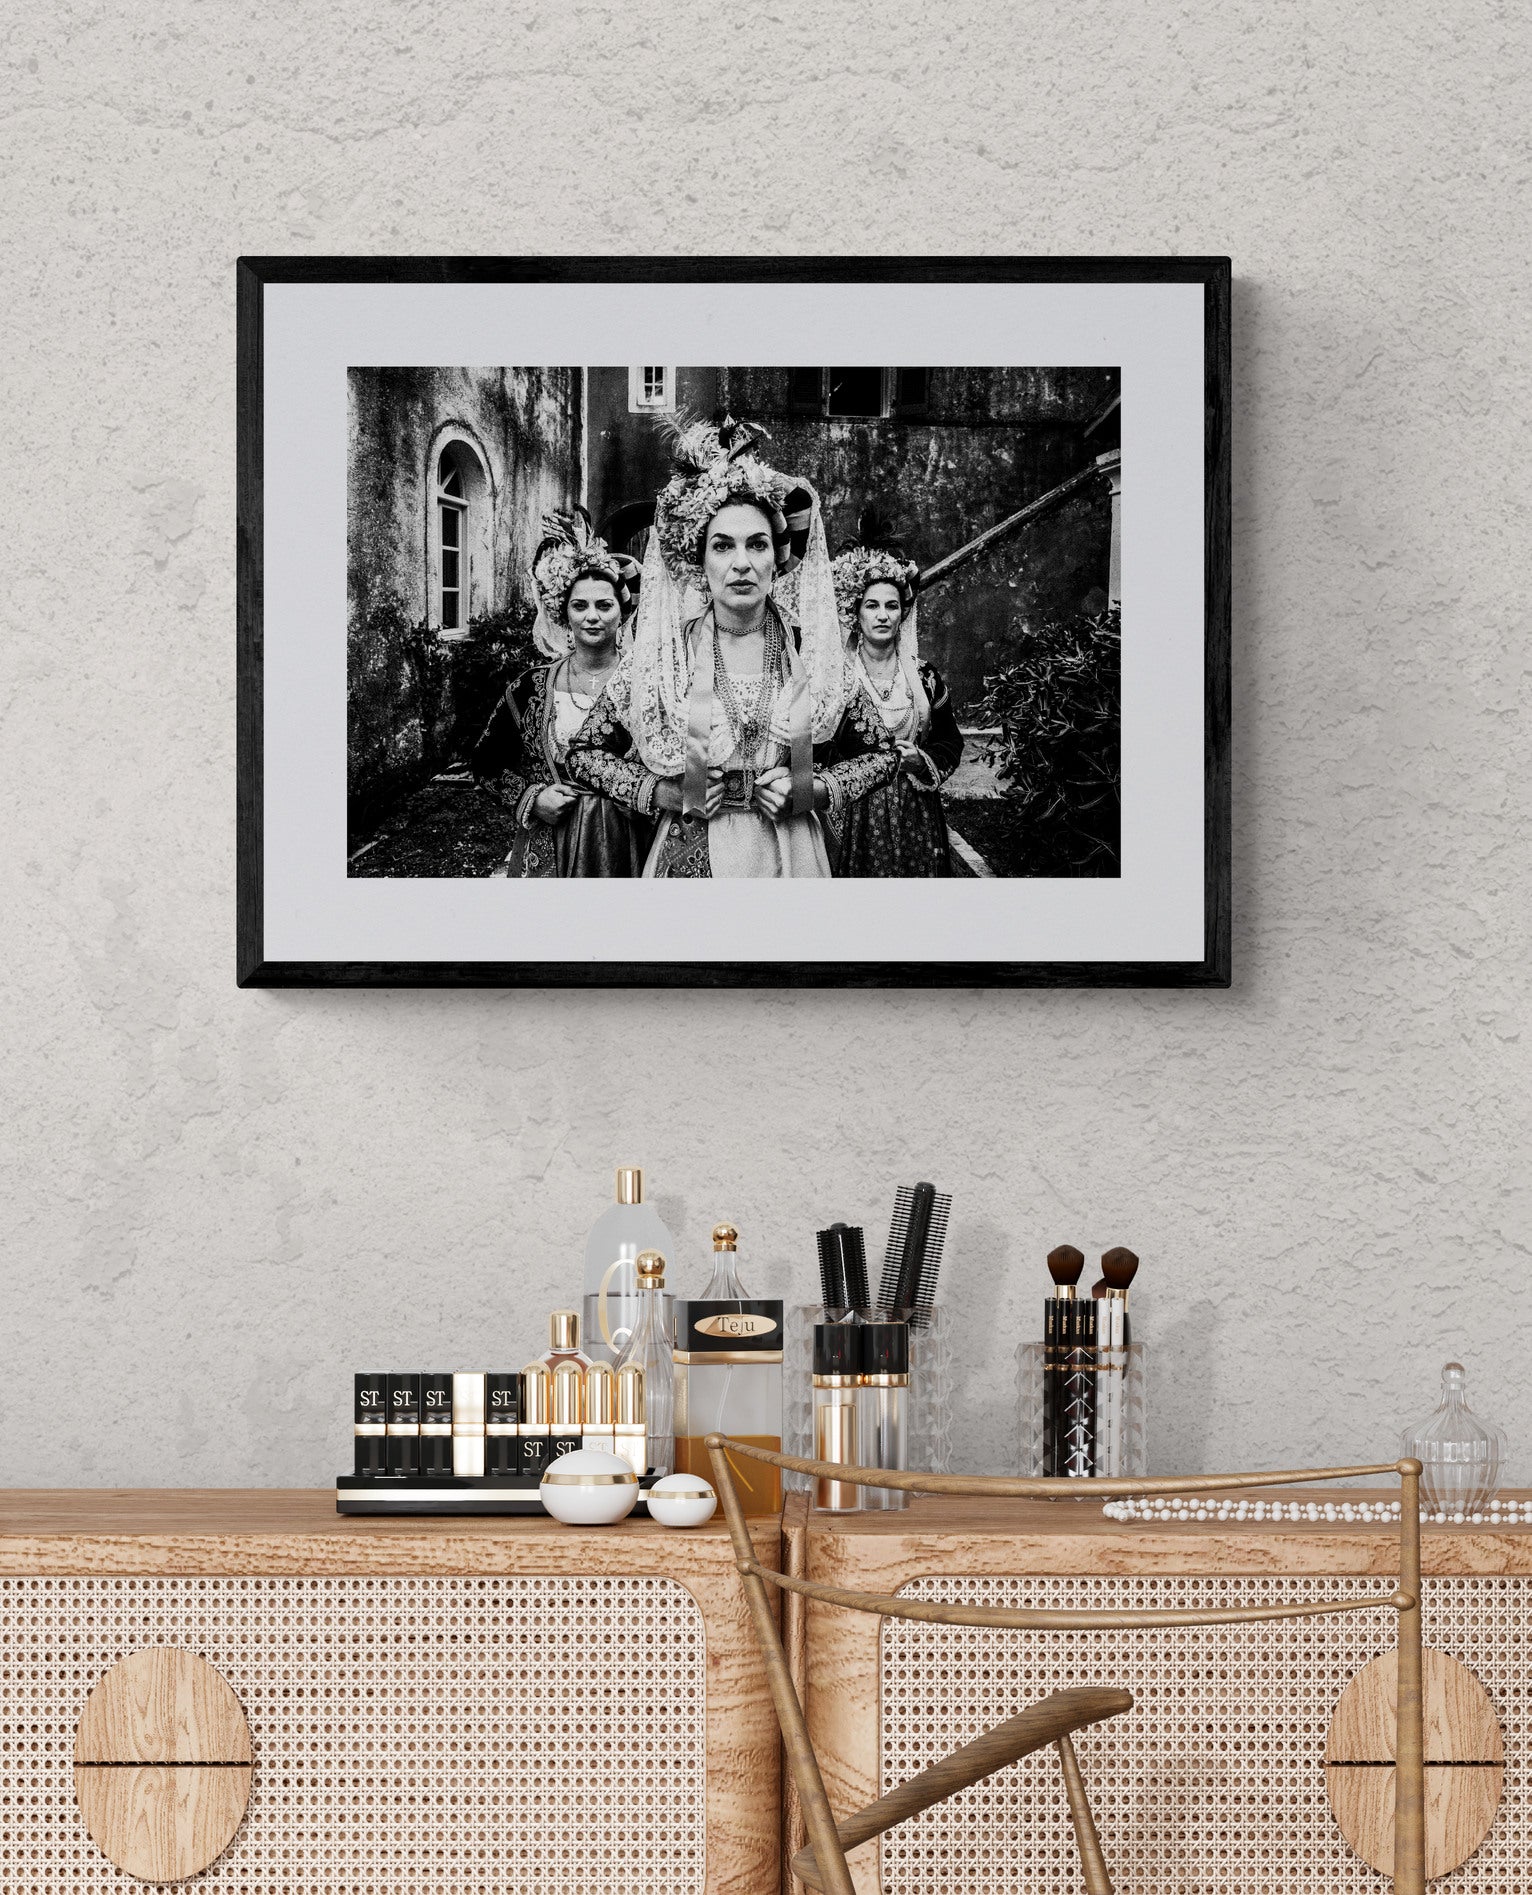 Black and White Photography Wall Art Greece | Costumes of central Corfu island at a local village Ionian Sea by George Tatakis - single framed photo